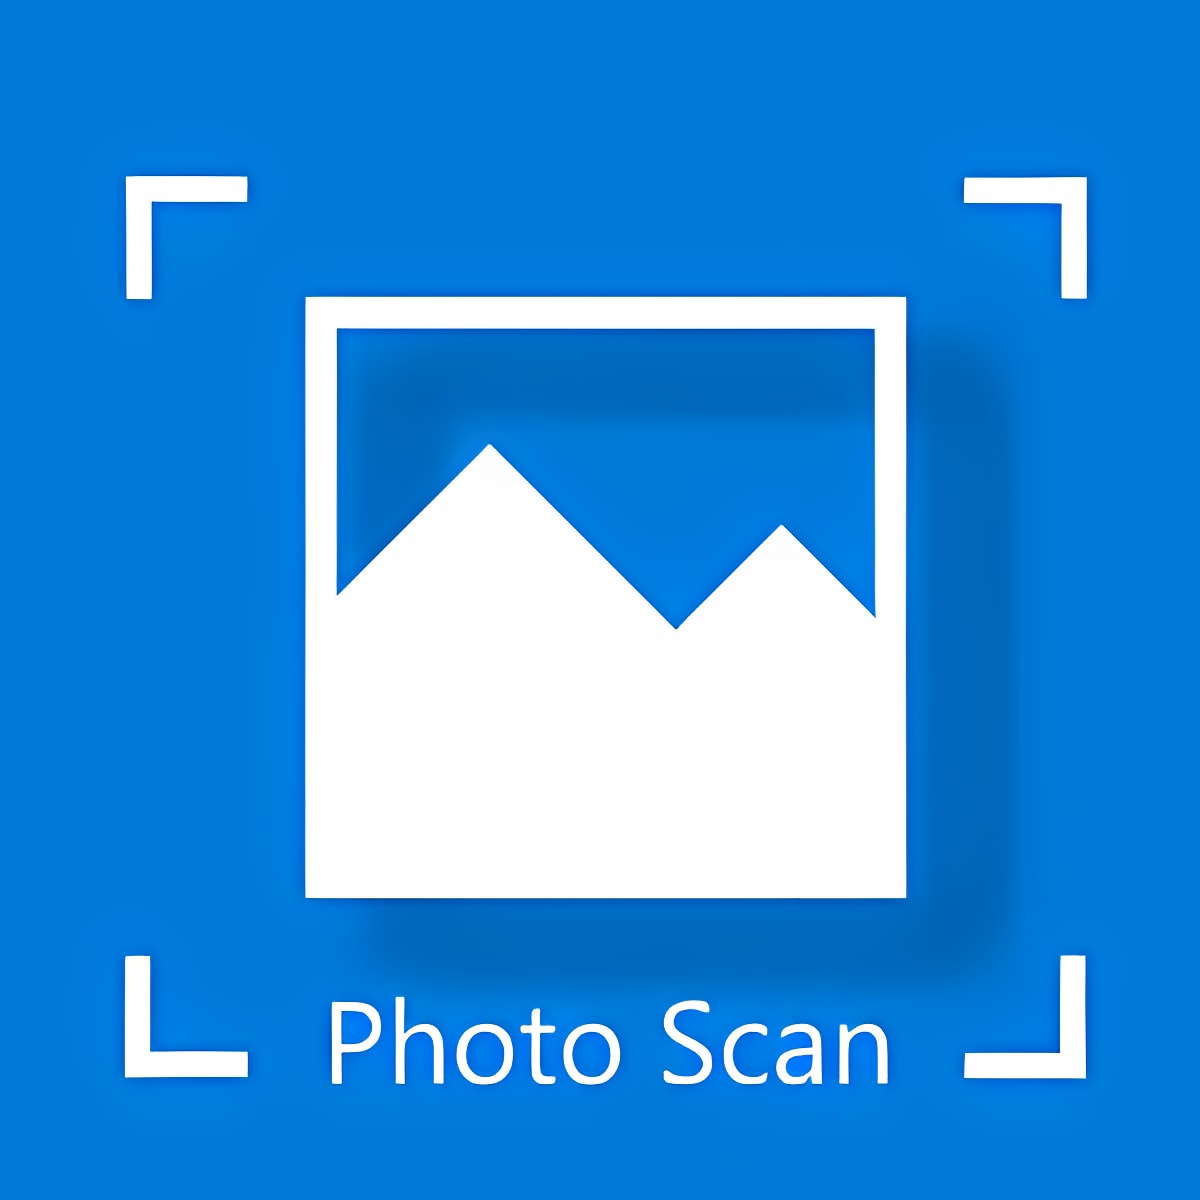 Download Photo Scan Install Latest App downloader